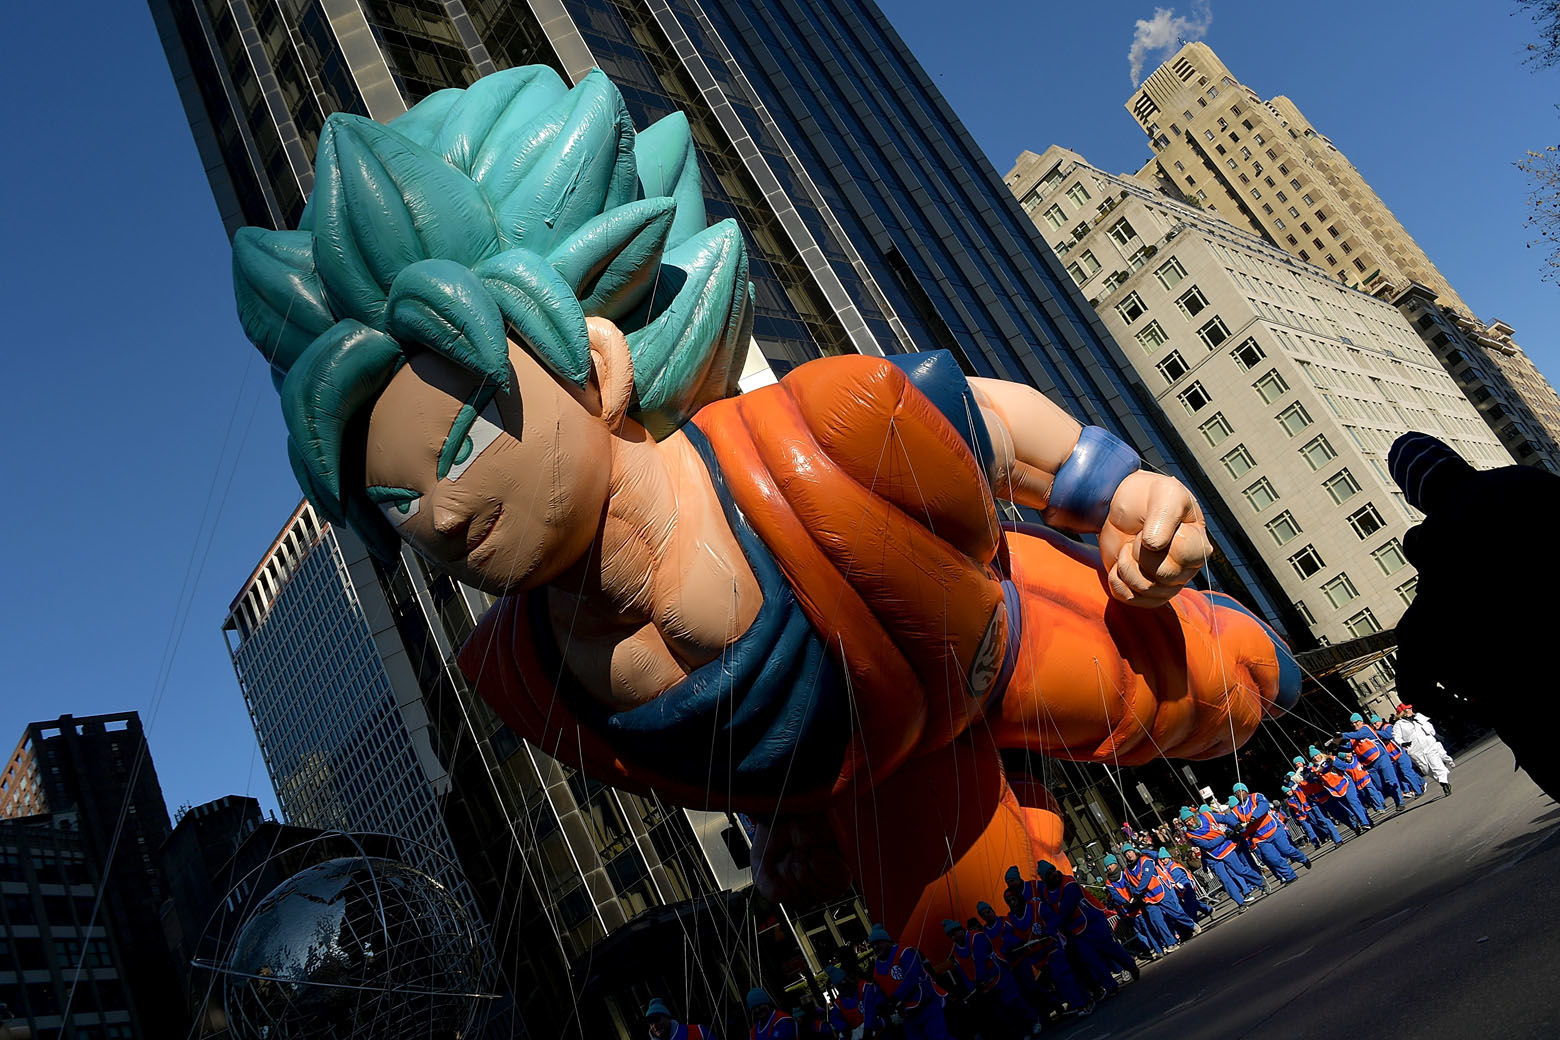 NEW YORK, NY - NOVEMBER 22:  The Goku from "Dragon Ball Super: Broly" balloon floats along the parade route during the 2018 Macy's Thanksgiving Day Parade on November 22, 2018 in New York City.  (Photo by Michael Loccisano/Getty Images)